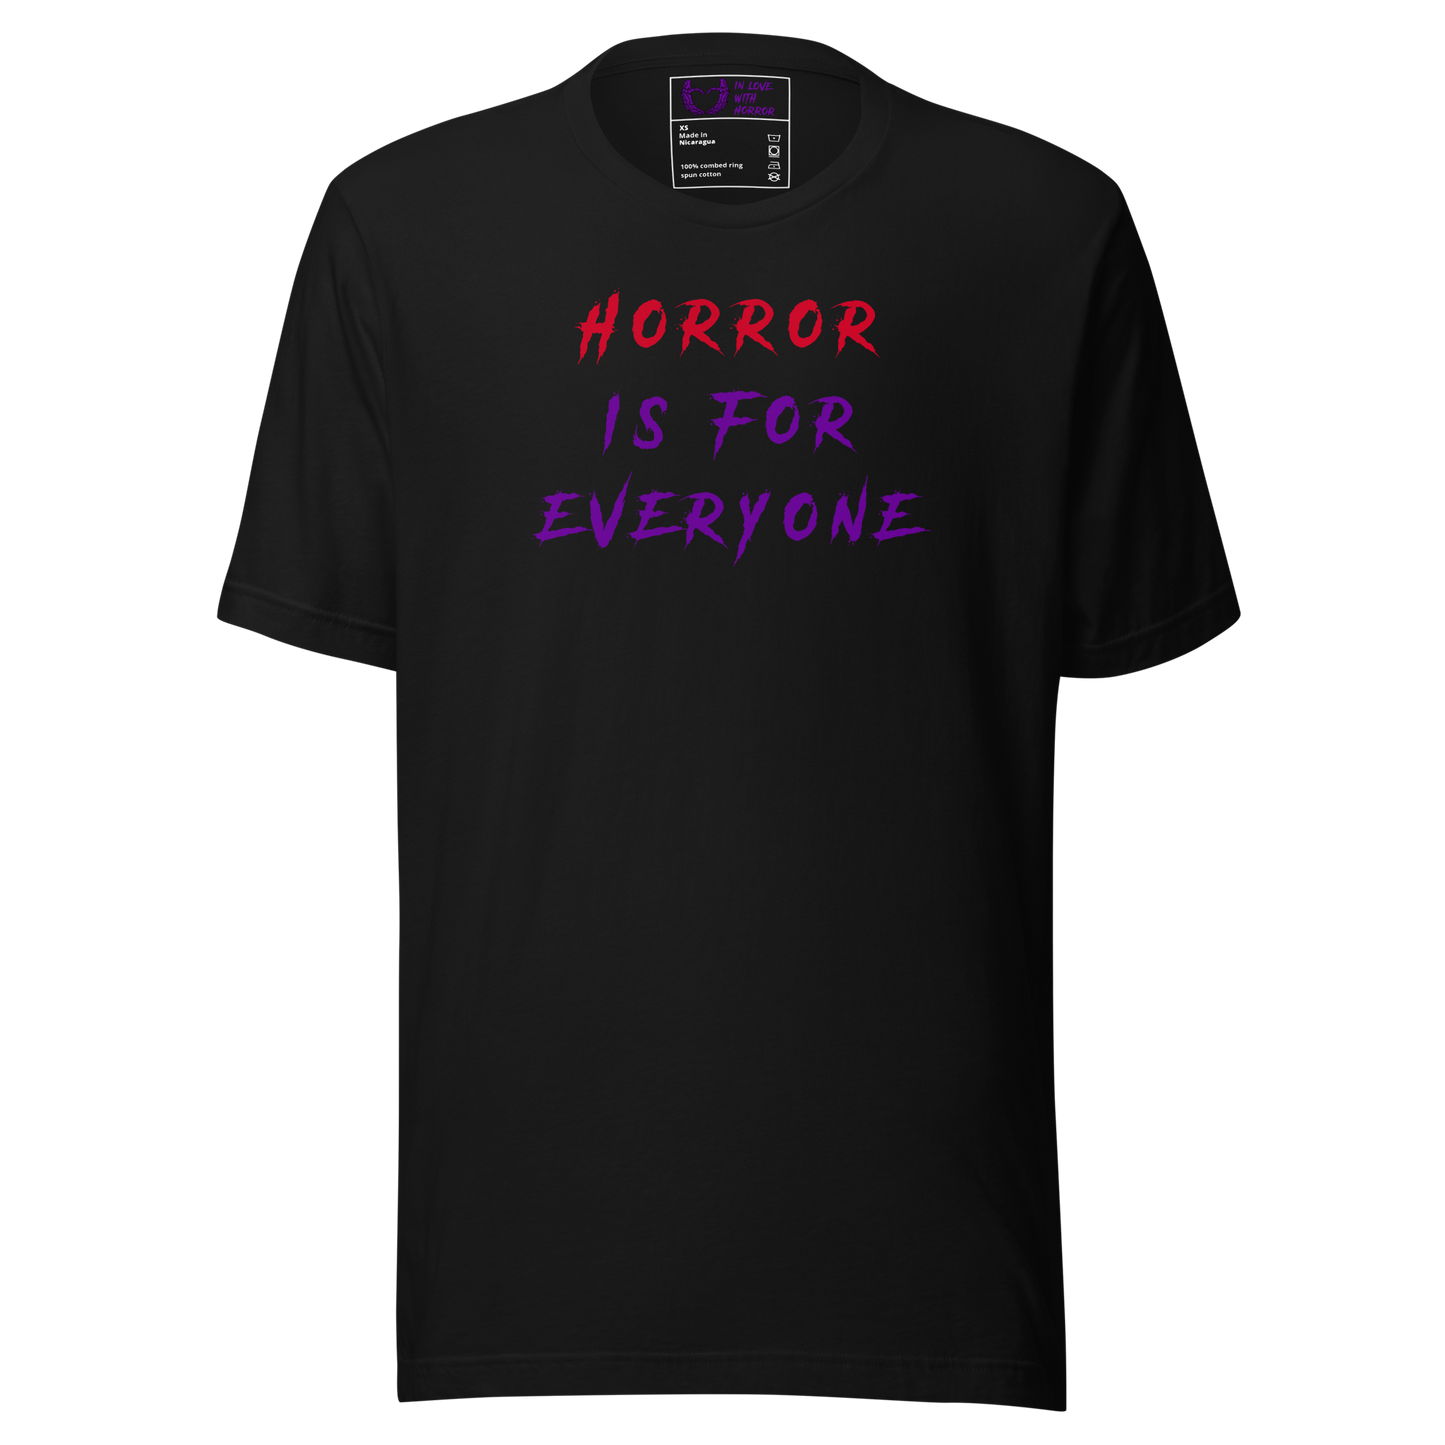 Horror is for Everyone Tee